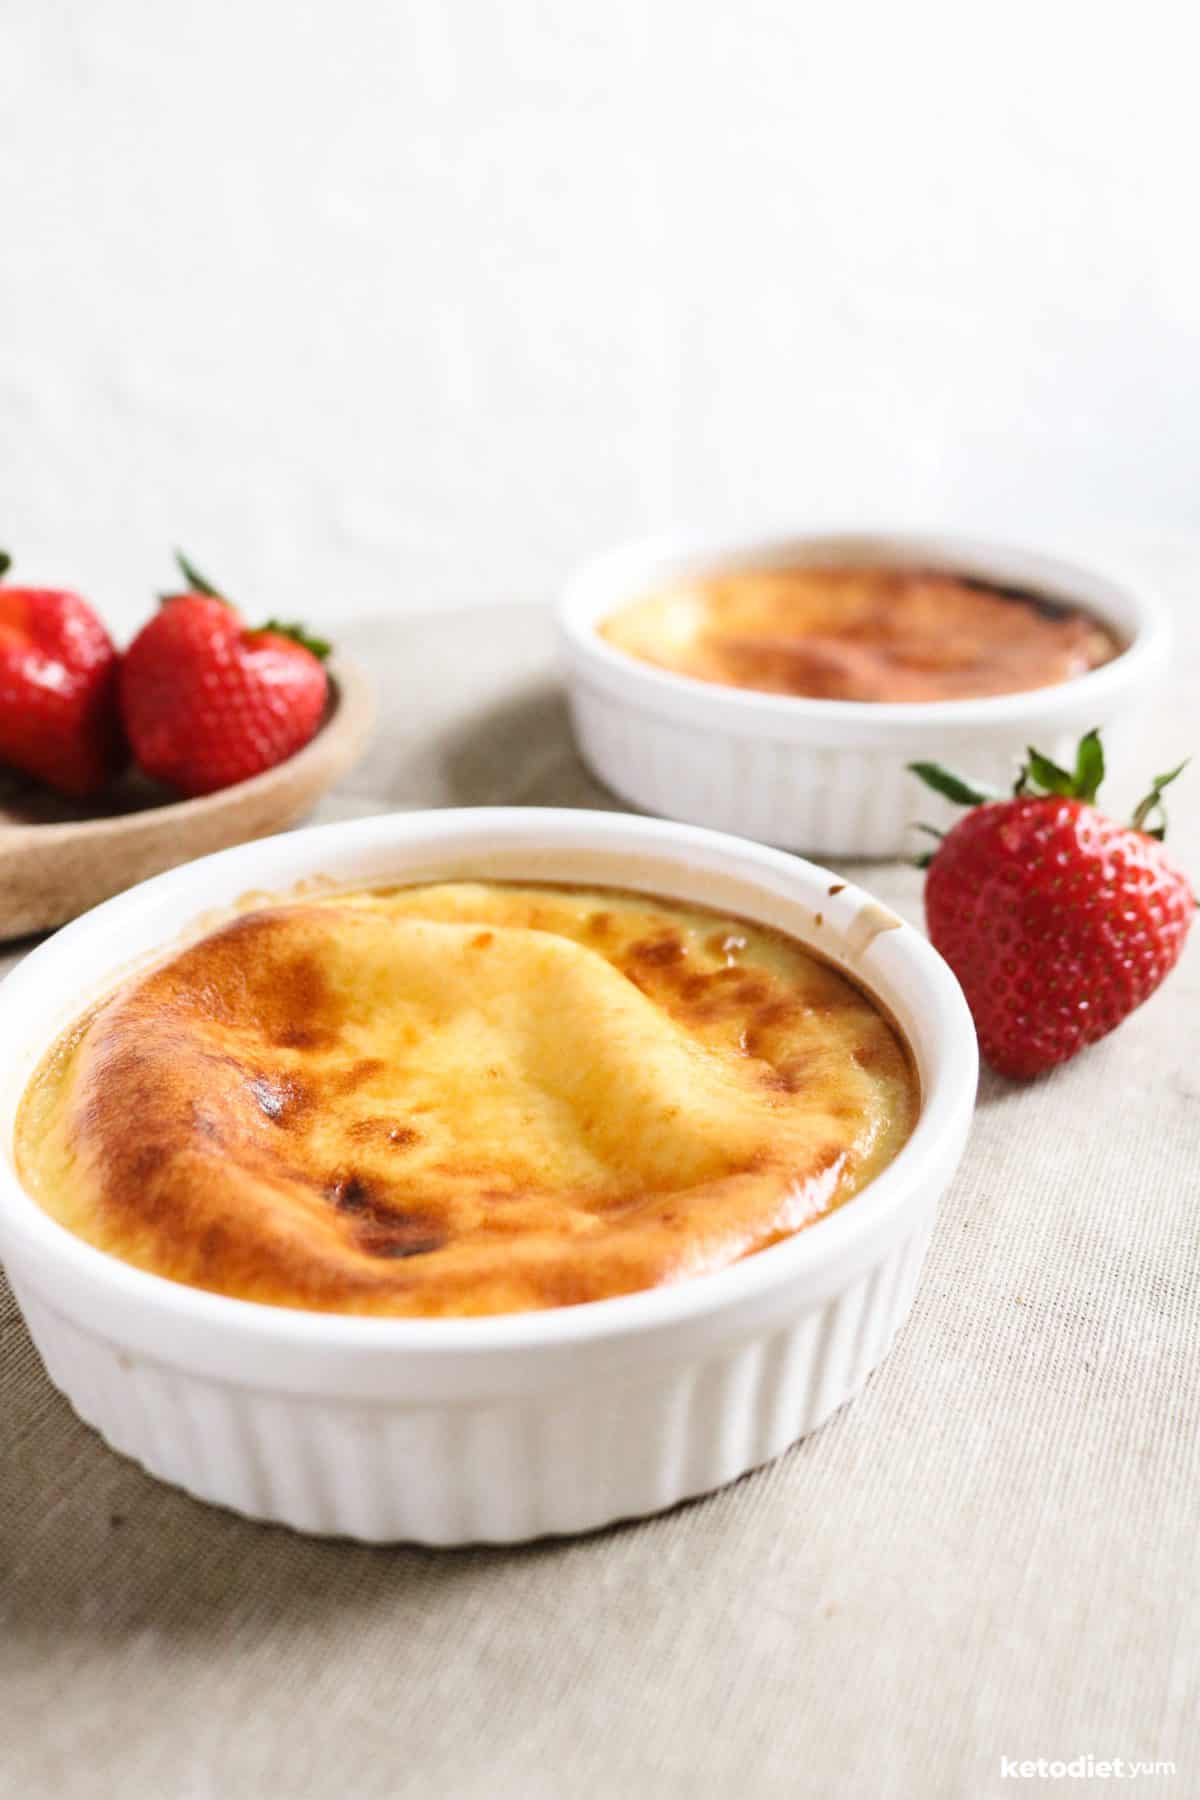 Vanilla keto custard or keto egg pudding fresh from the oven and ready to eat